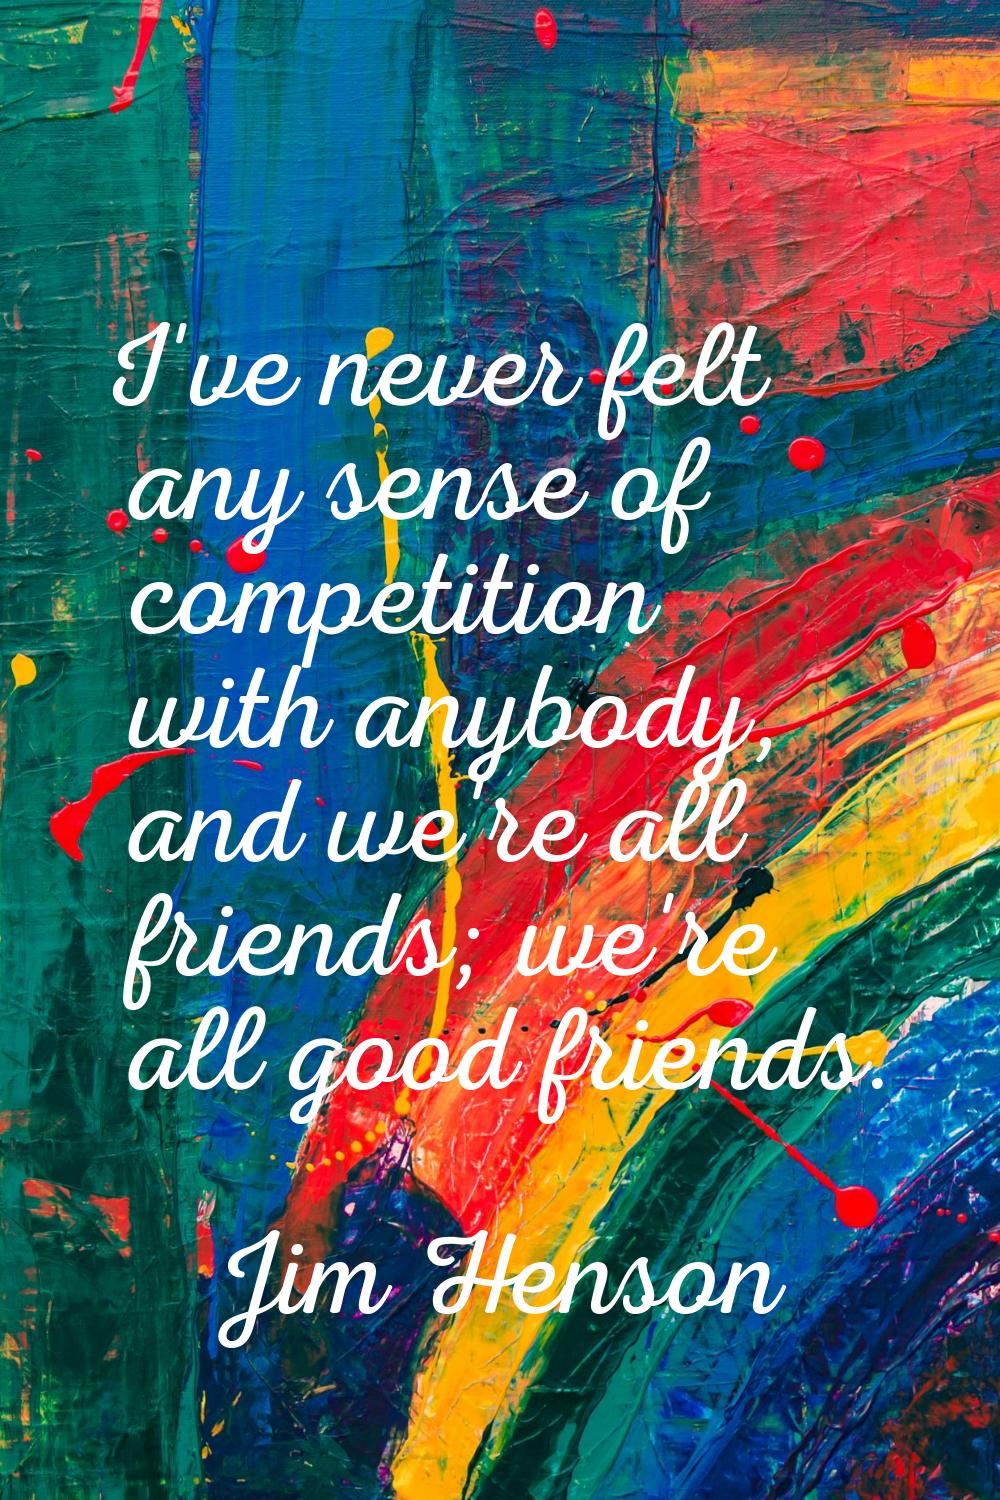 I've never felt any sense of competition with anybody, and we're all friends; we're all good friend